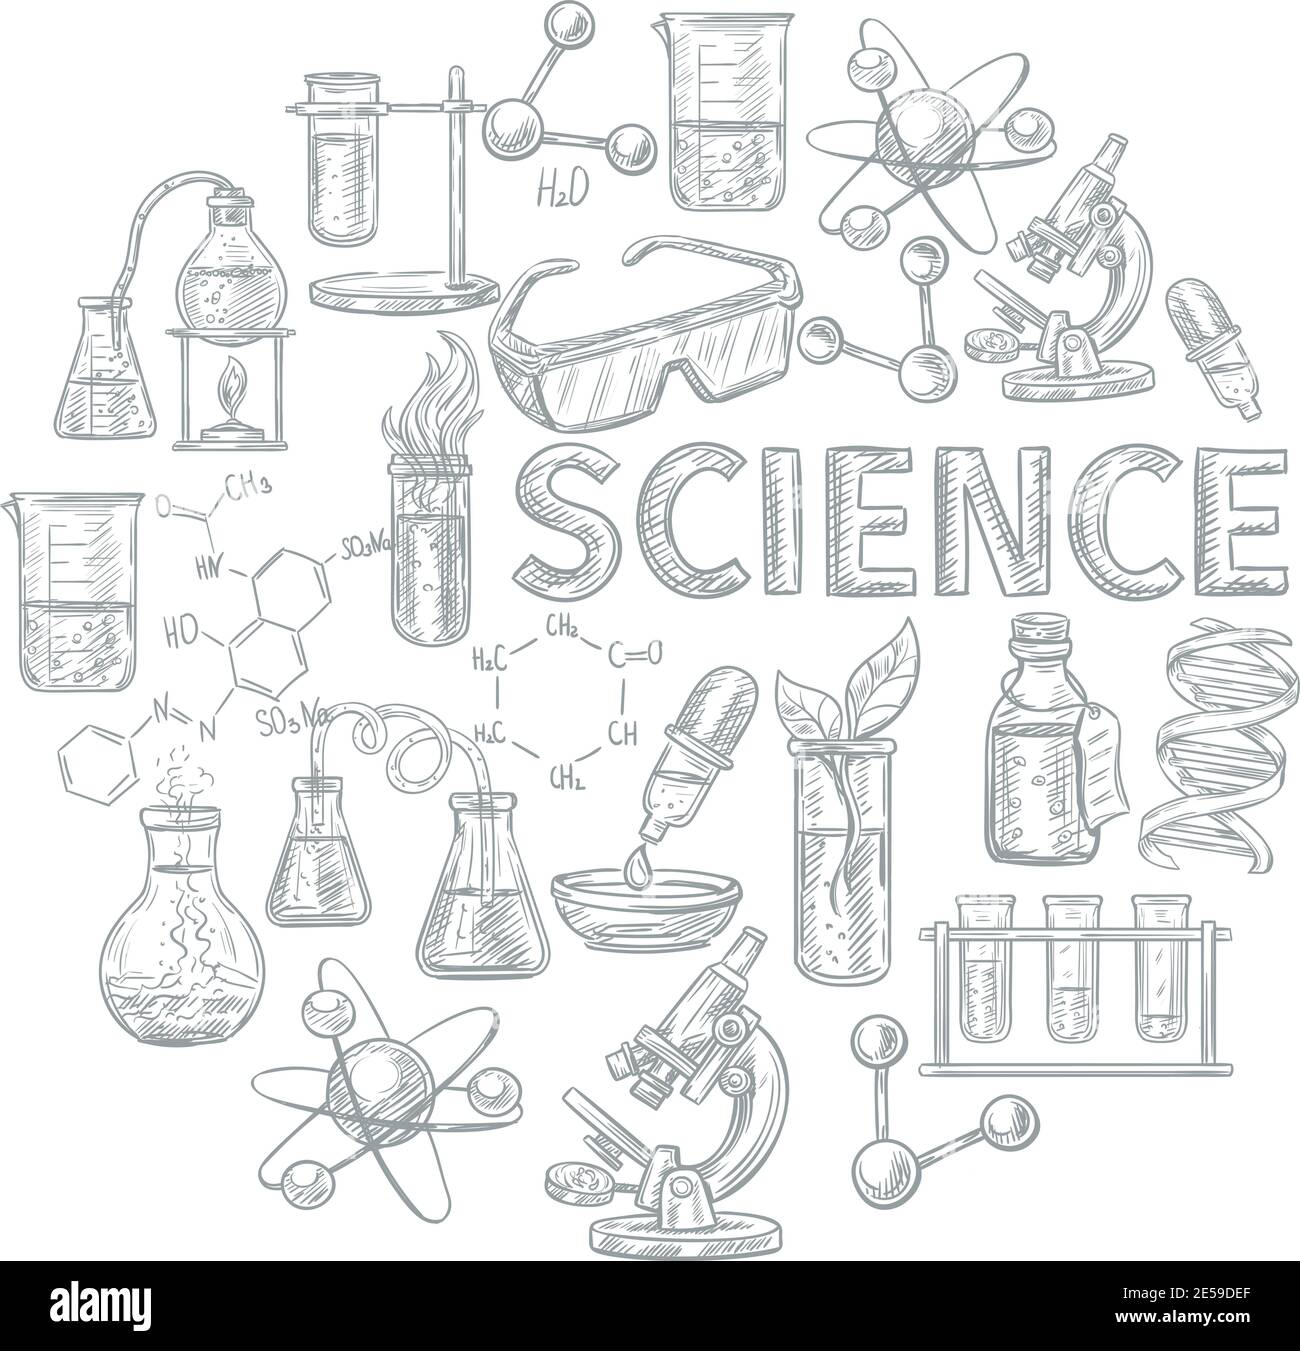 Sketch of objects of a chemical laboratory  Stock Illustration  87030035  PIXTA